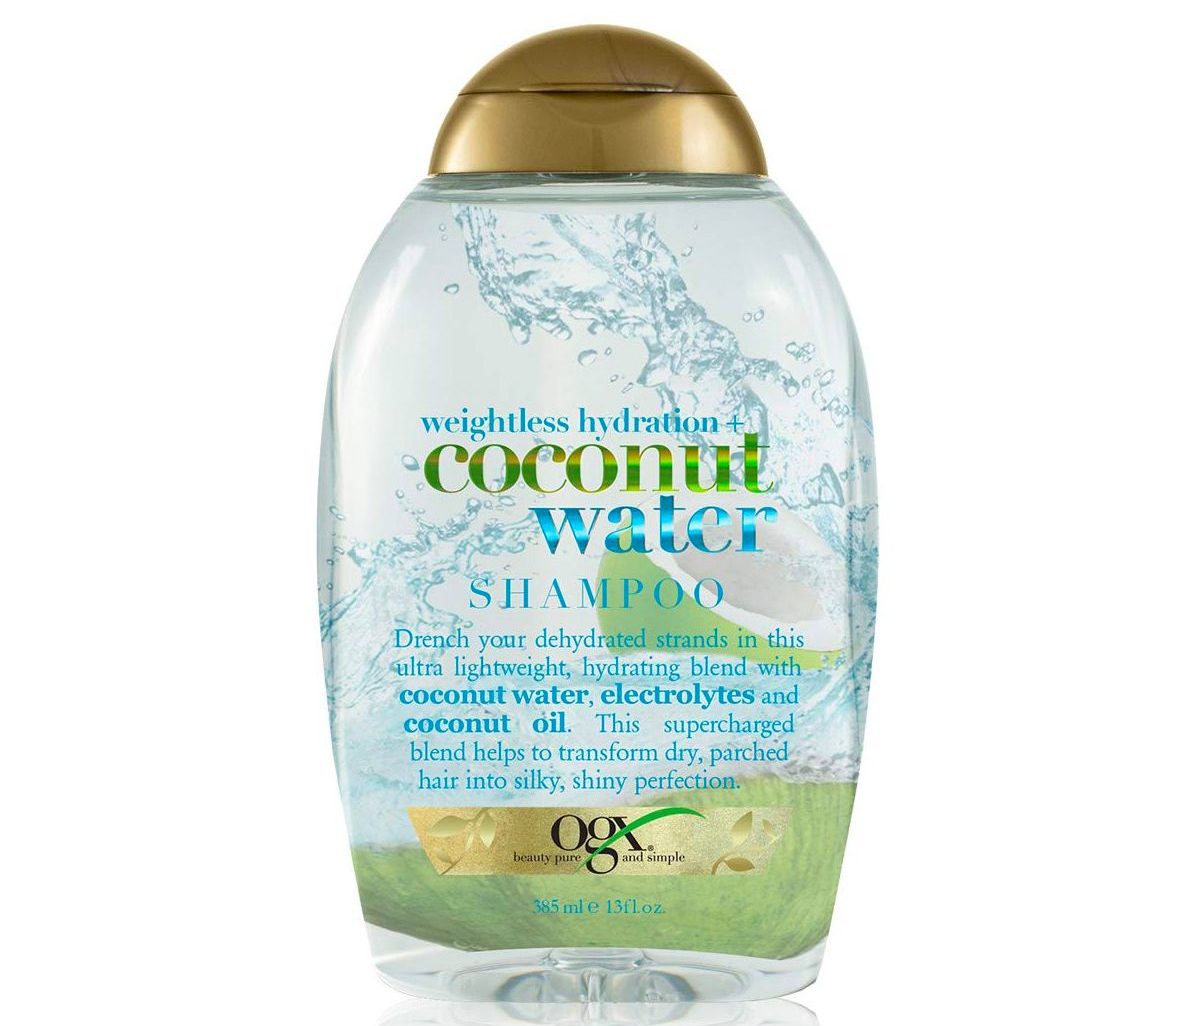 OGX Weightless Hydration and Coconut Water Shampoo